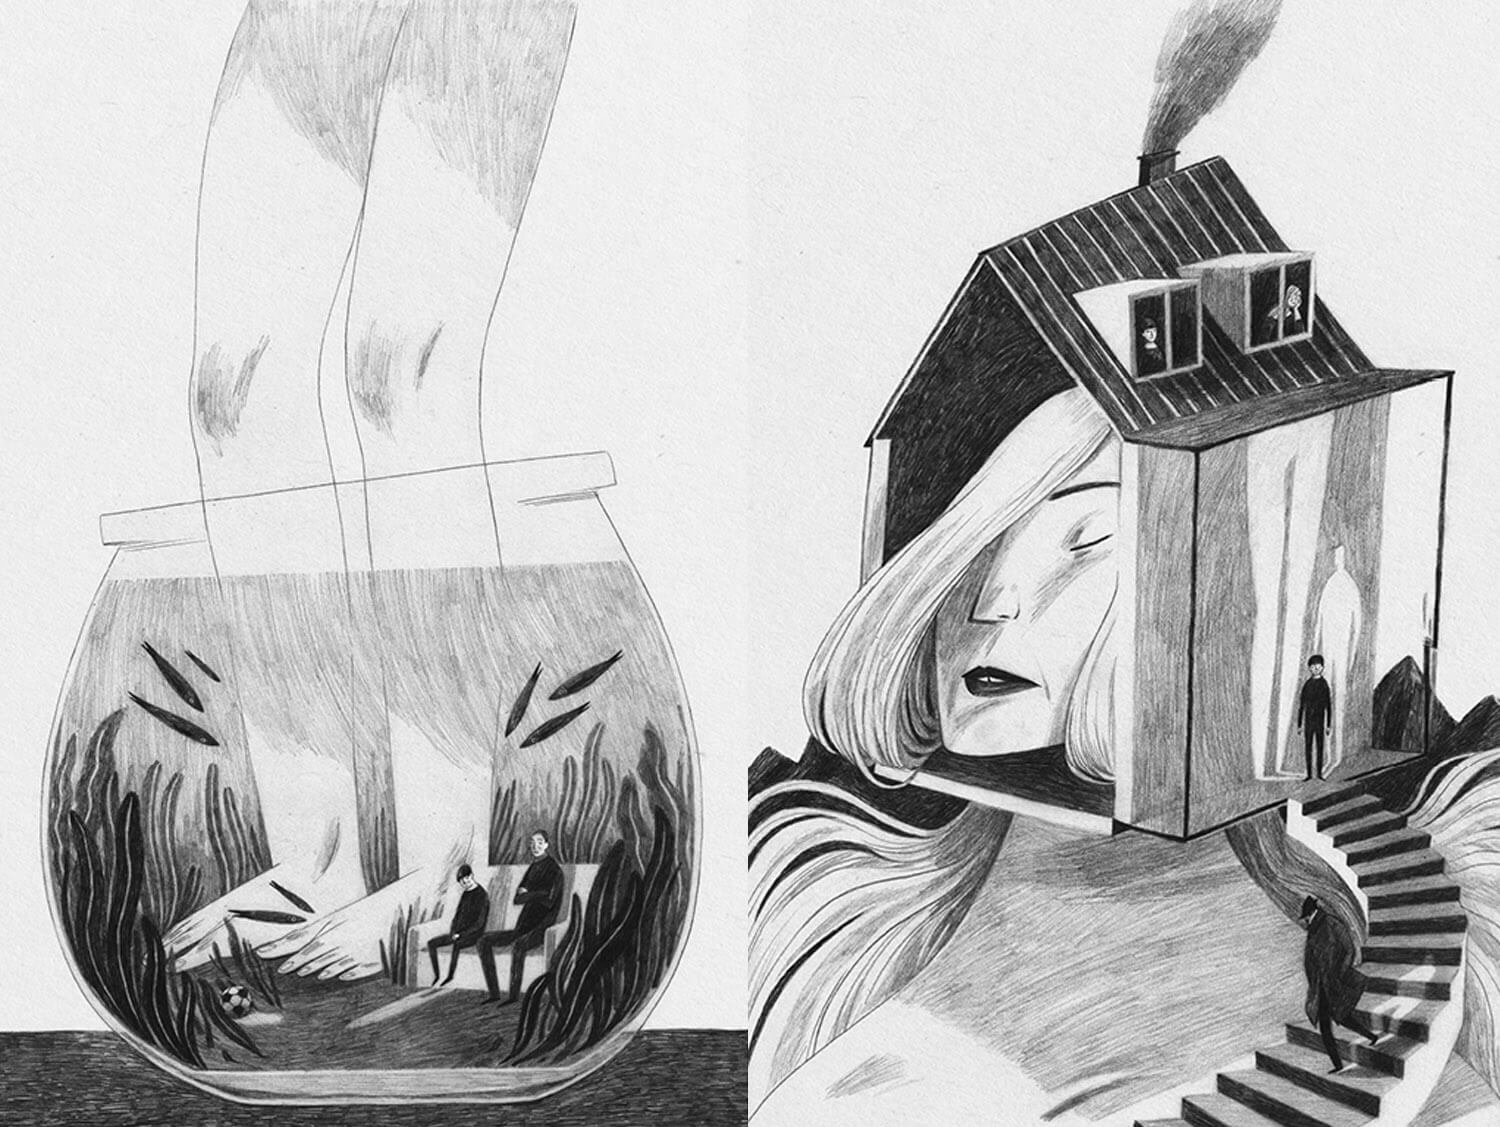 surreal pencil drawings of figures in house and fishbowl